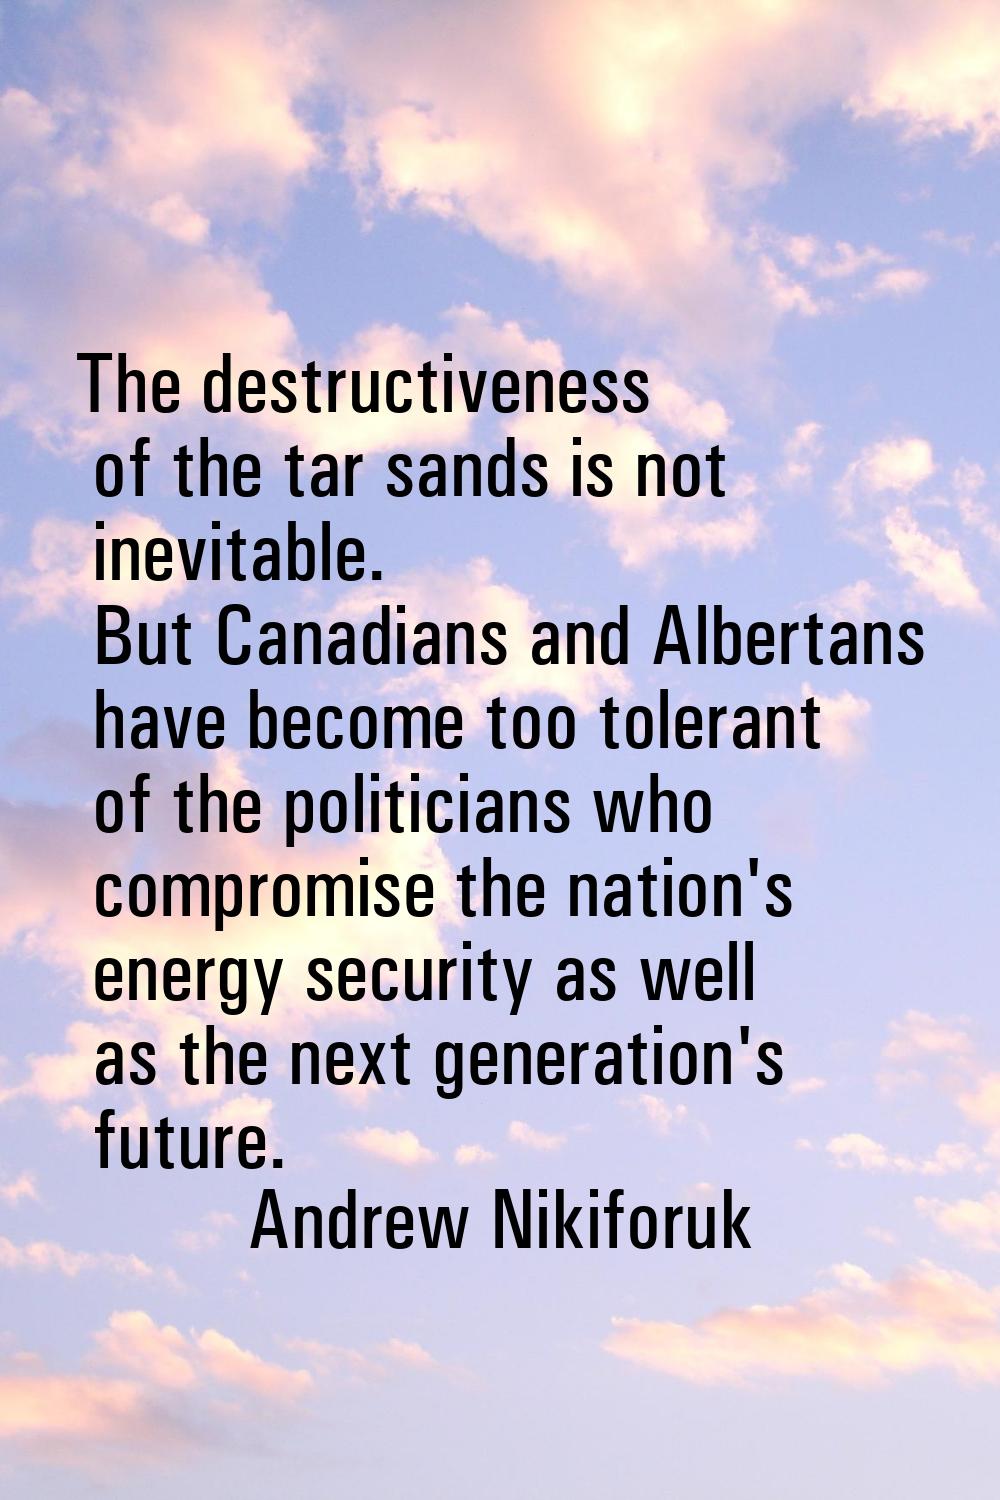 The destructiveness of the tar sands is not inevitable. But Canadians and Albertans have become too